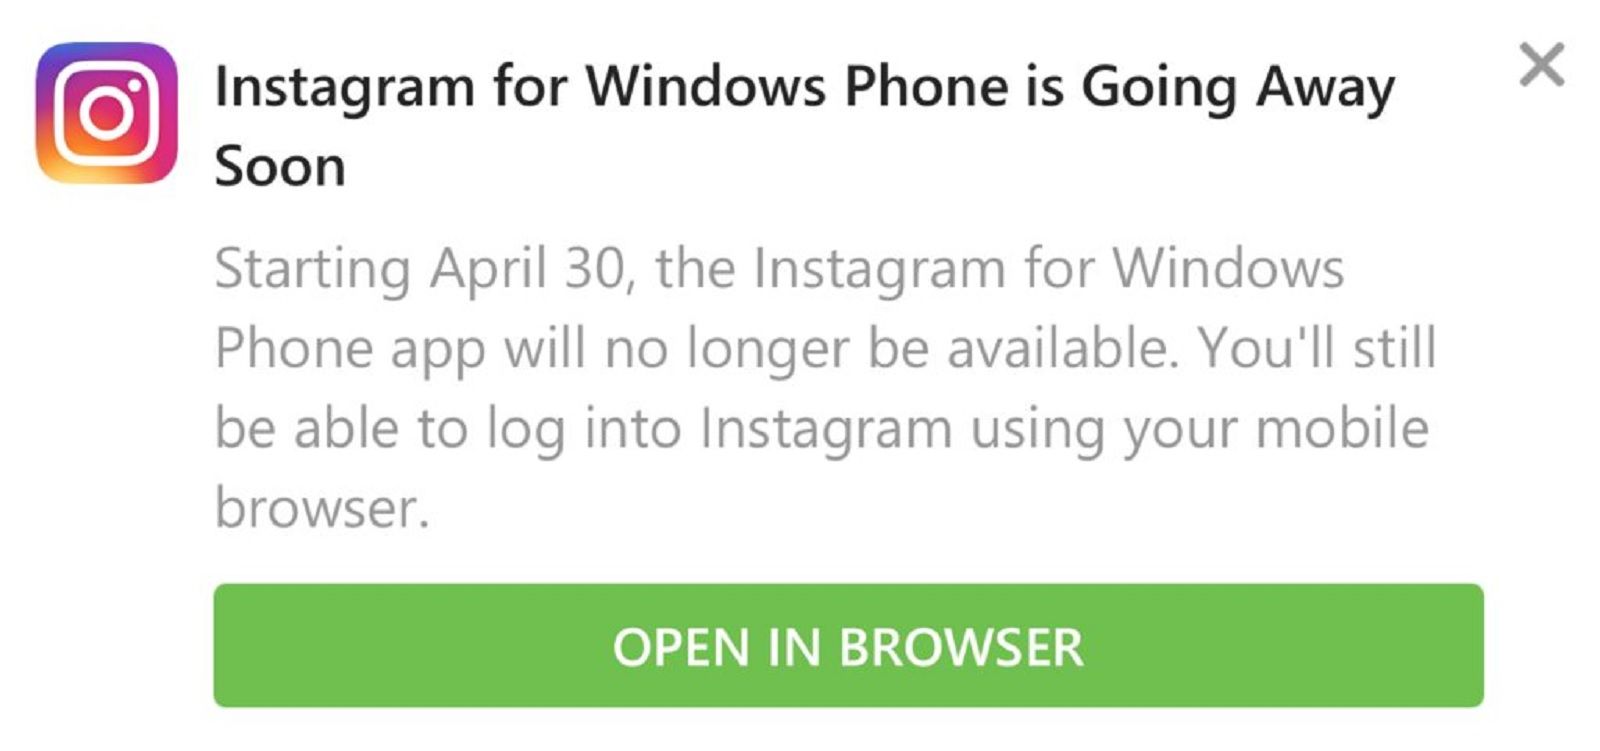 Still Using Windows Phone Youre About To Lose Access To Facebook And More image 2